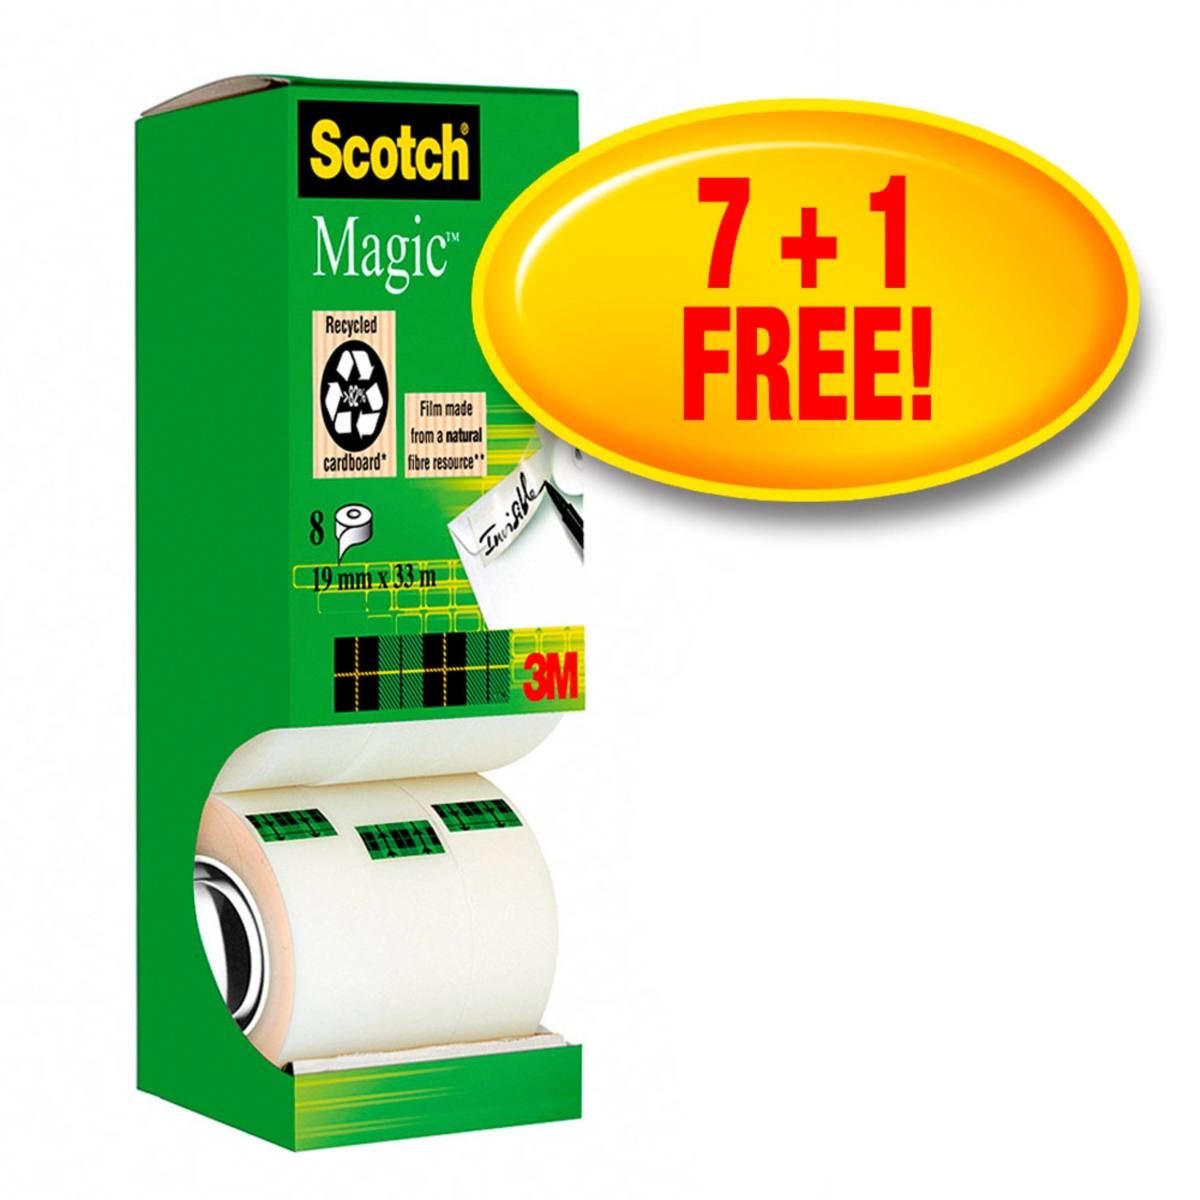 3M Scotch Magic adhesive tape promotion with 8 rolls 19 mm x 33 m